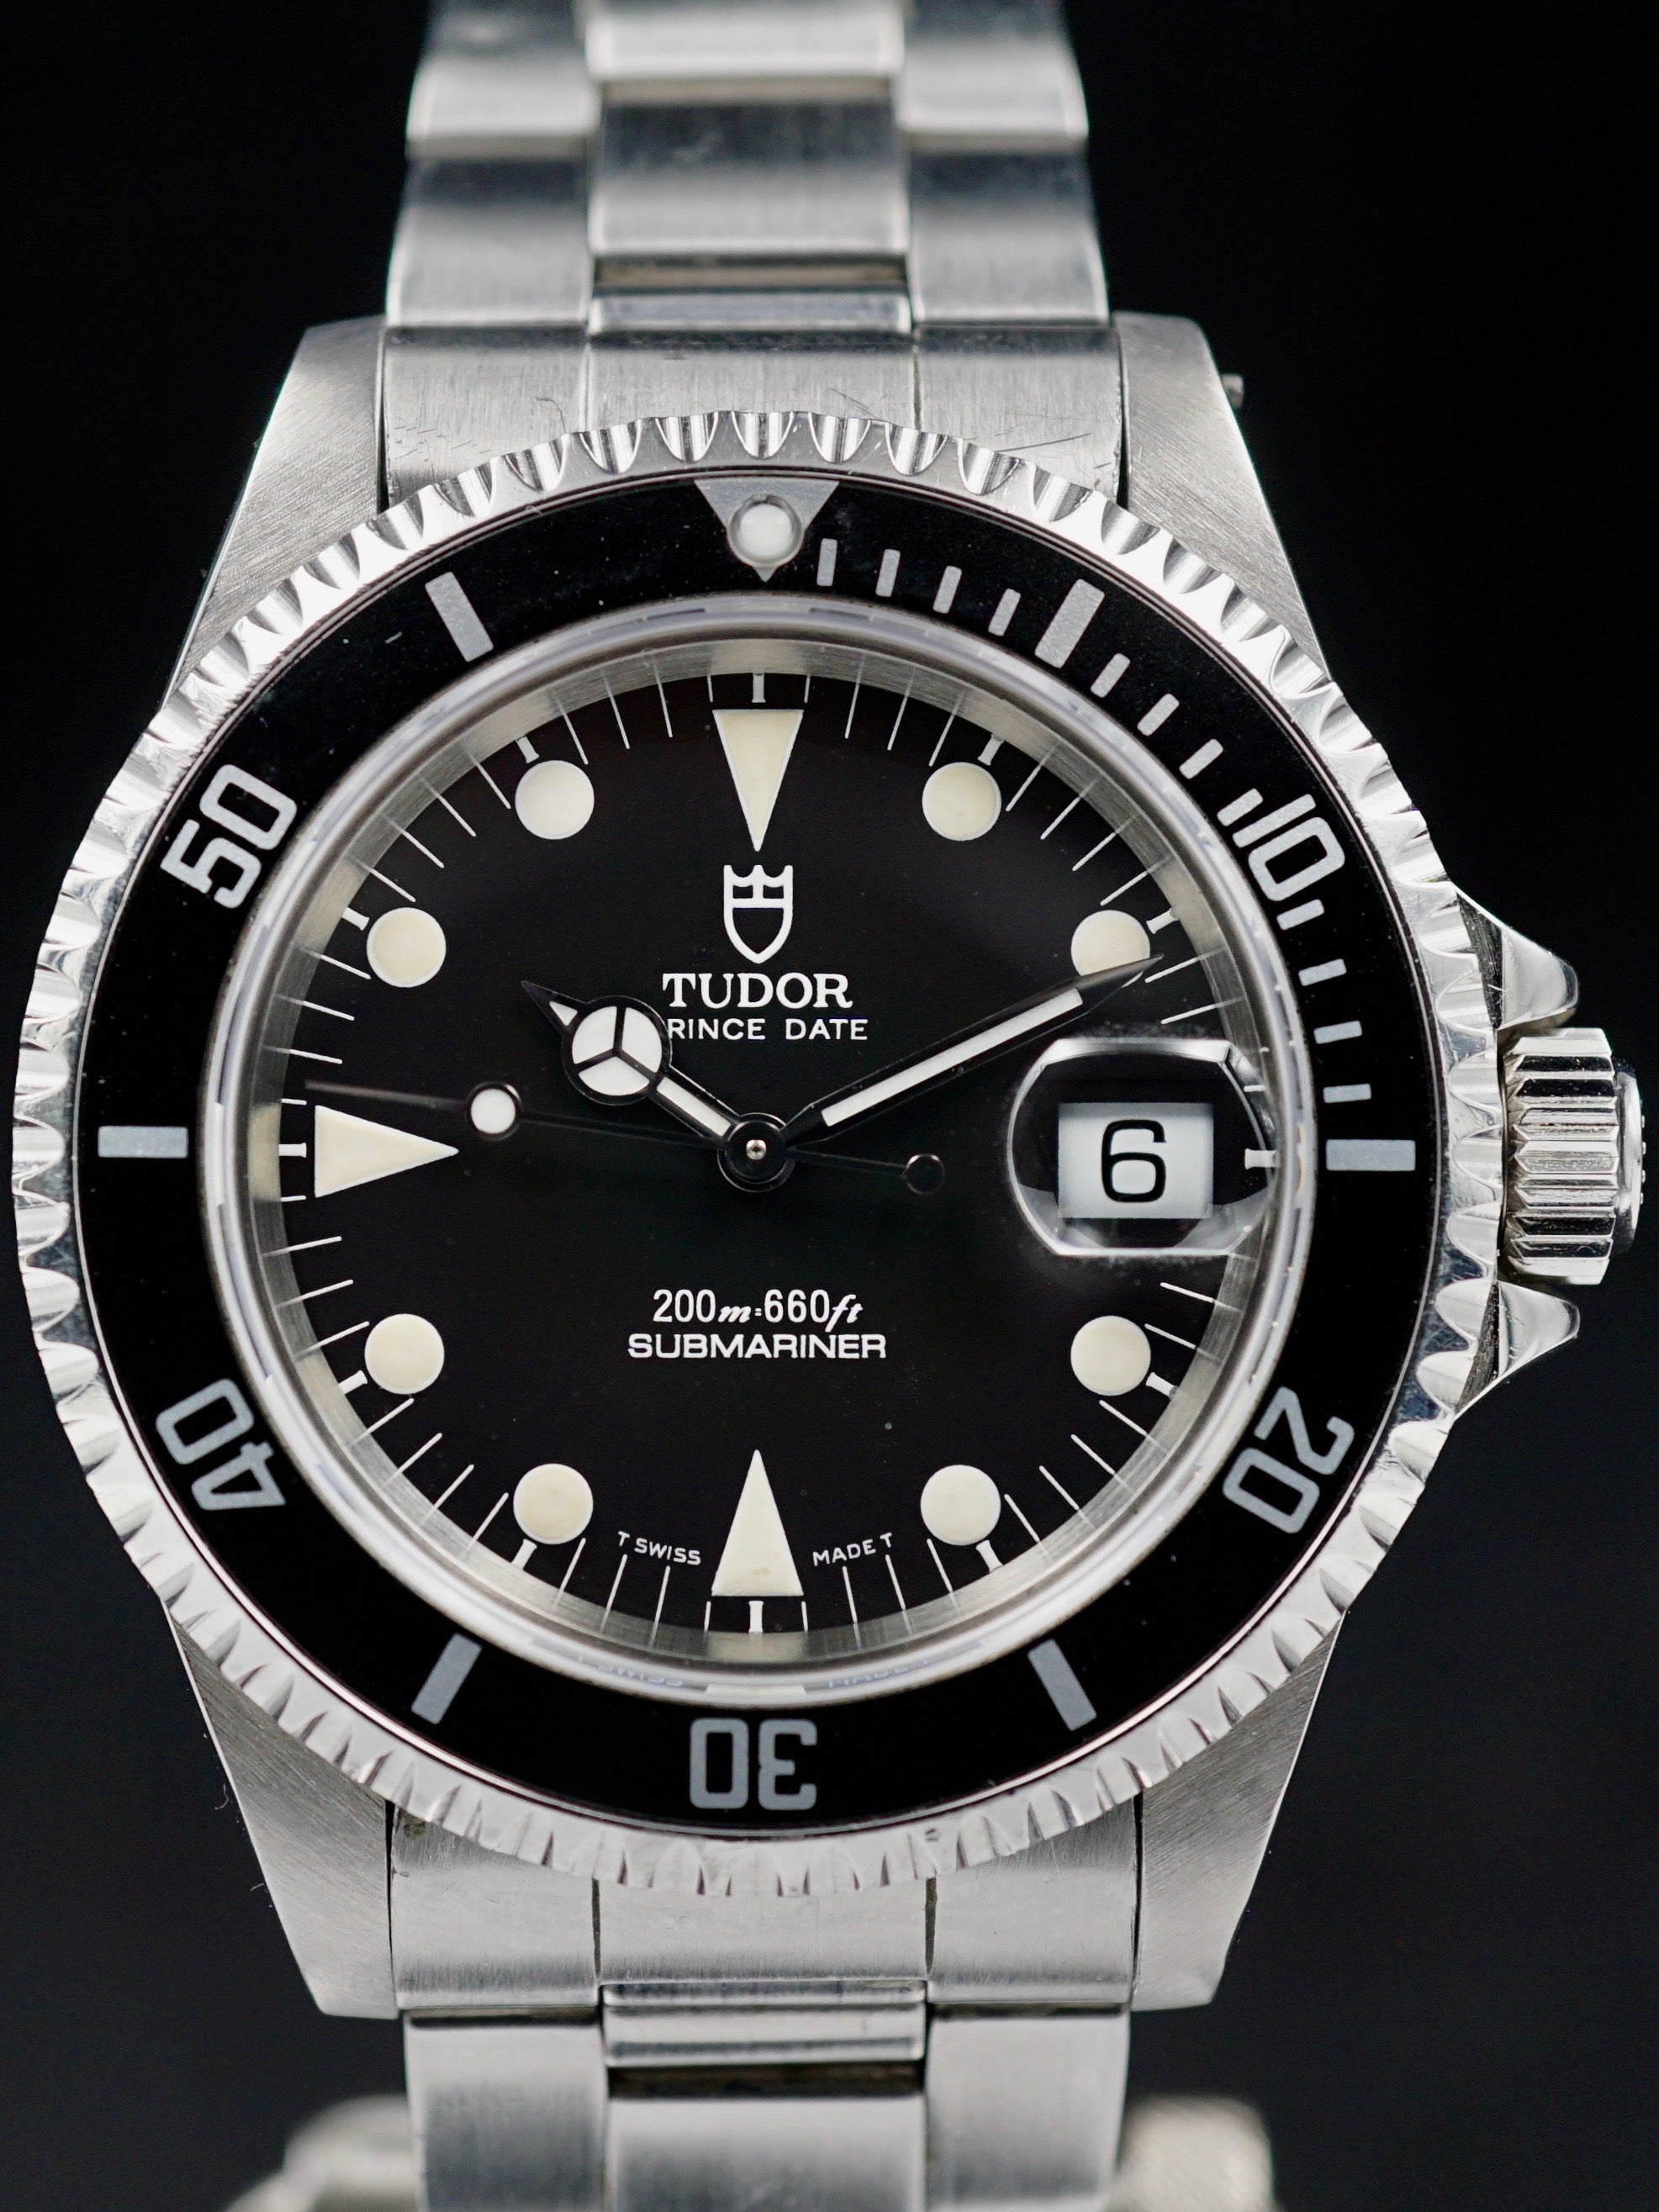 1995  "Matte Dial" Tudor Submariner (Ref. 79190) W/ box and cards